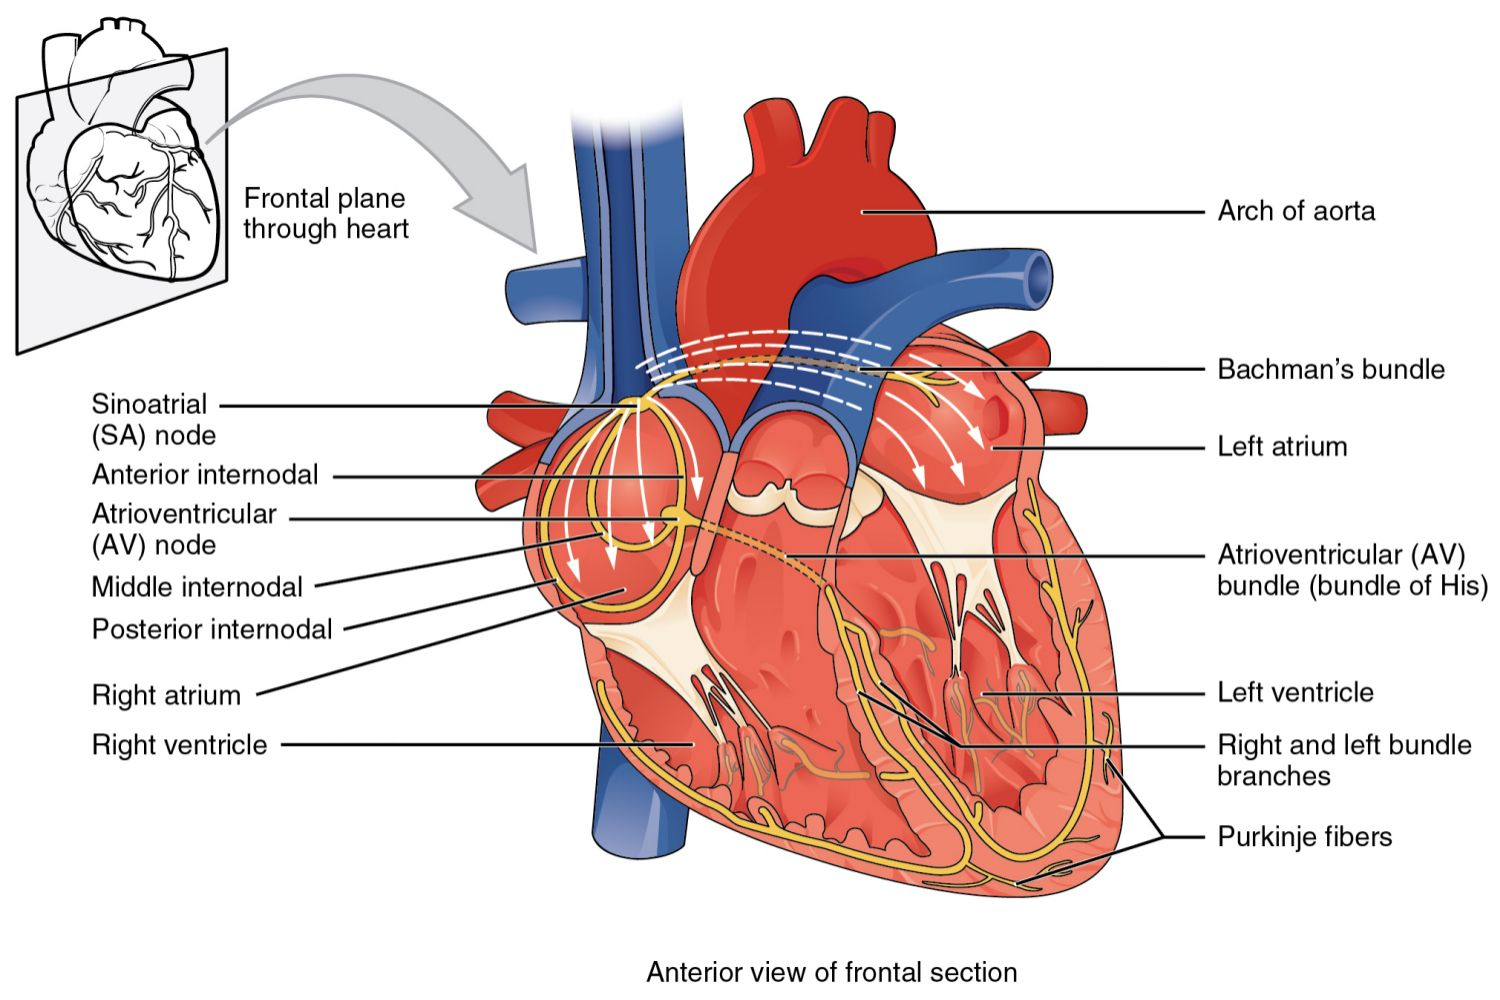 Diagram Of Heart Overview Of Sinoatrial And Atrioventricular Heart Nodes